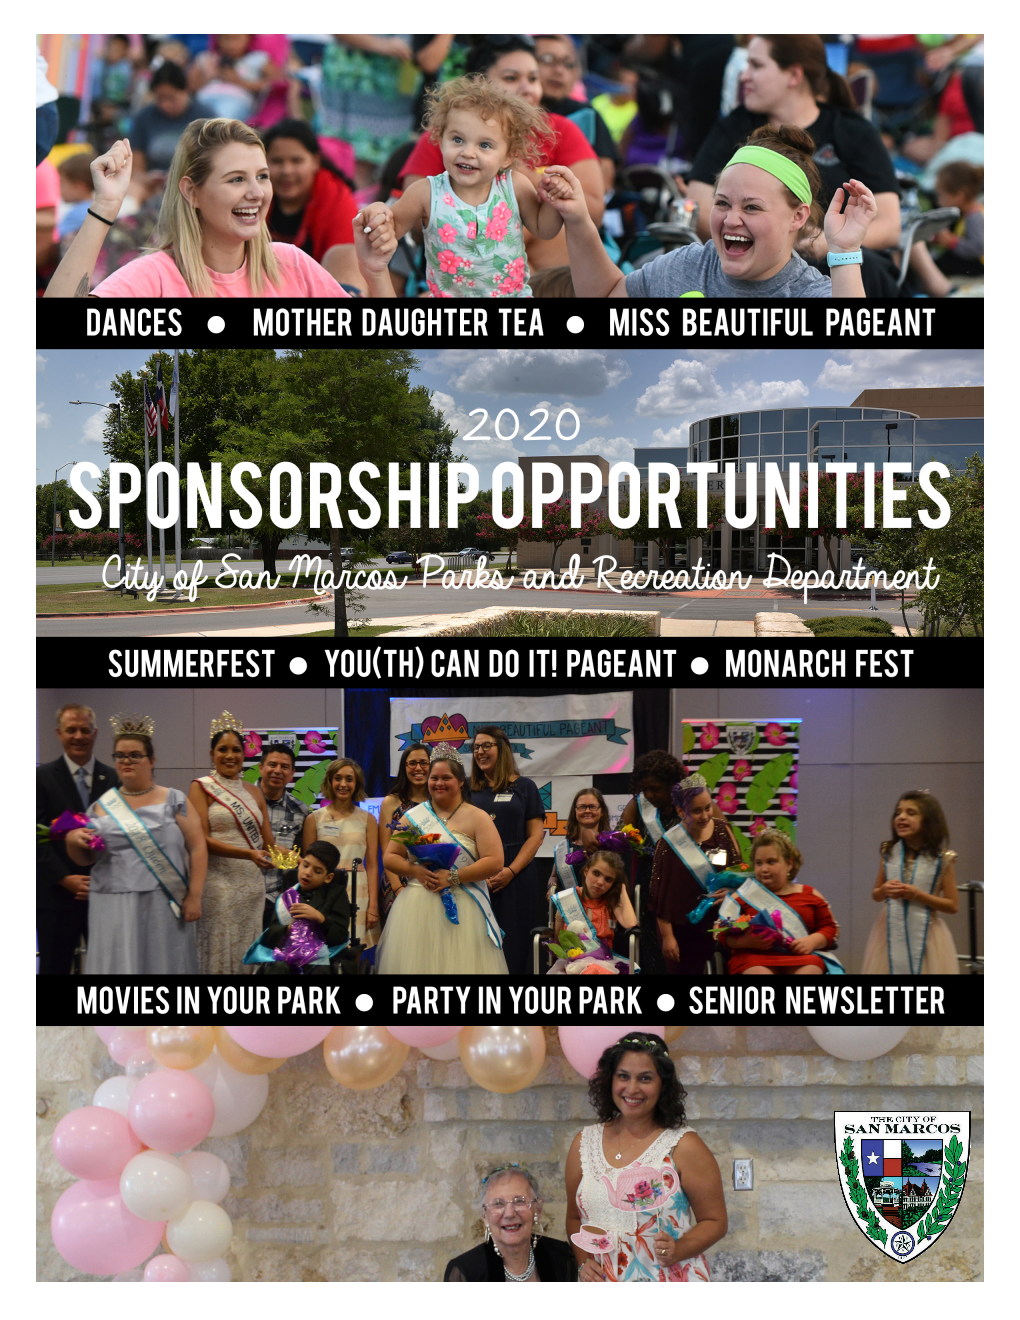 Sponsorship Opportunities That Are Sure to Meet Your Advertising and Marketing Needs